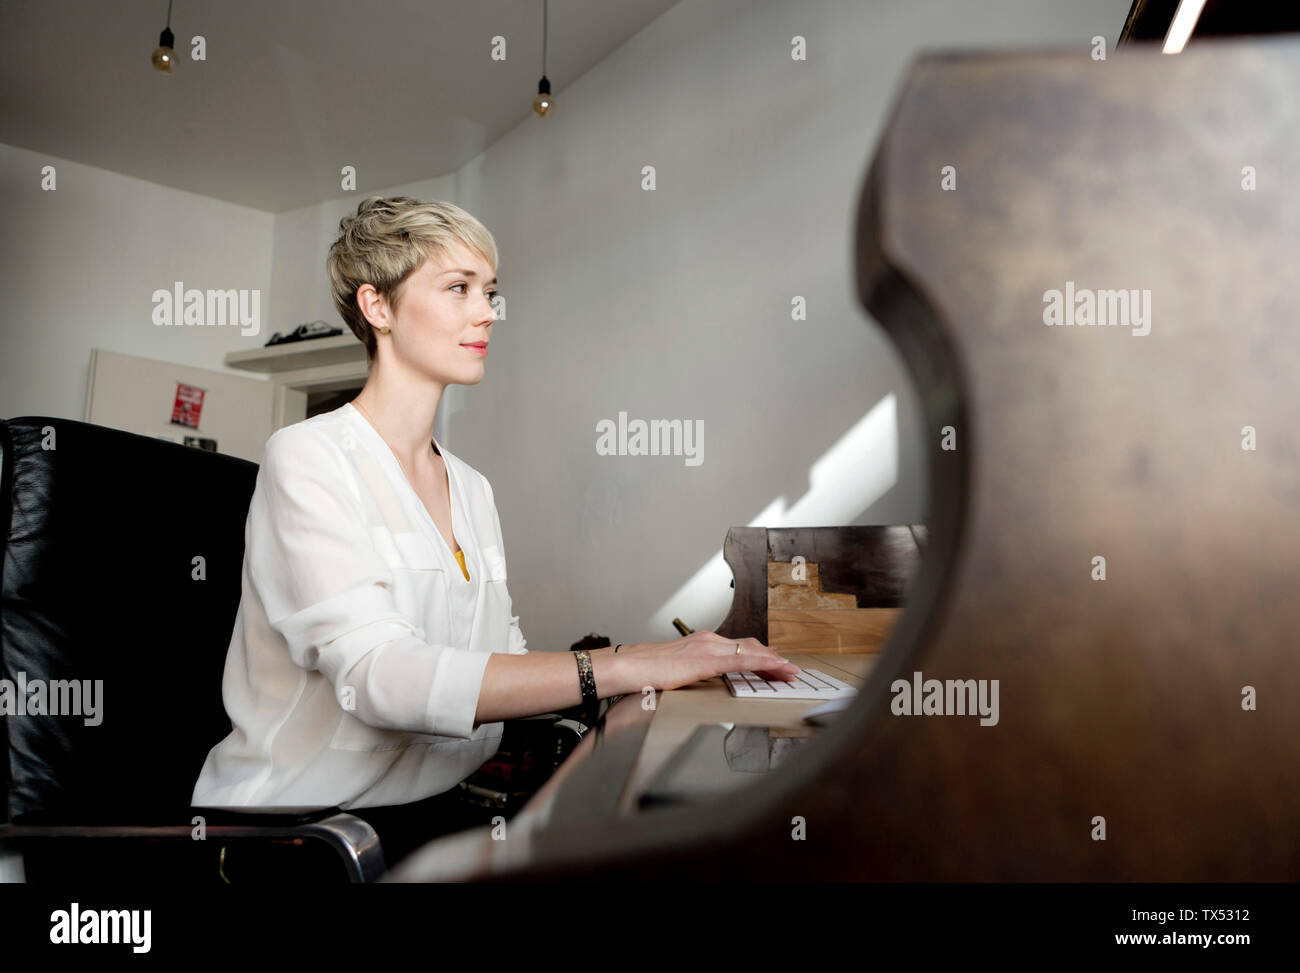 Blond woman working at home office Stock Photo